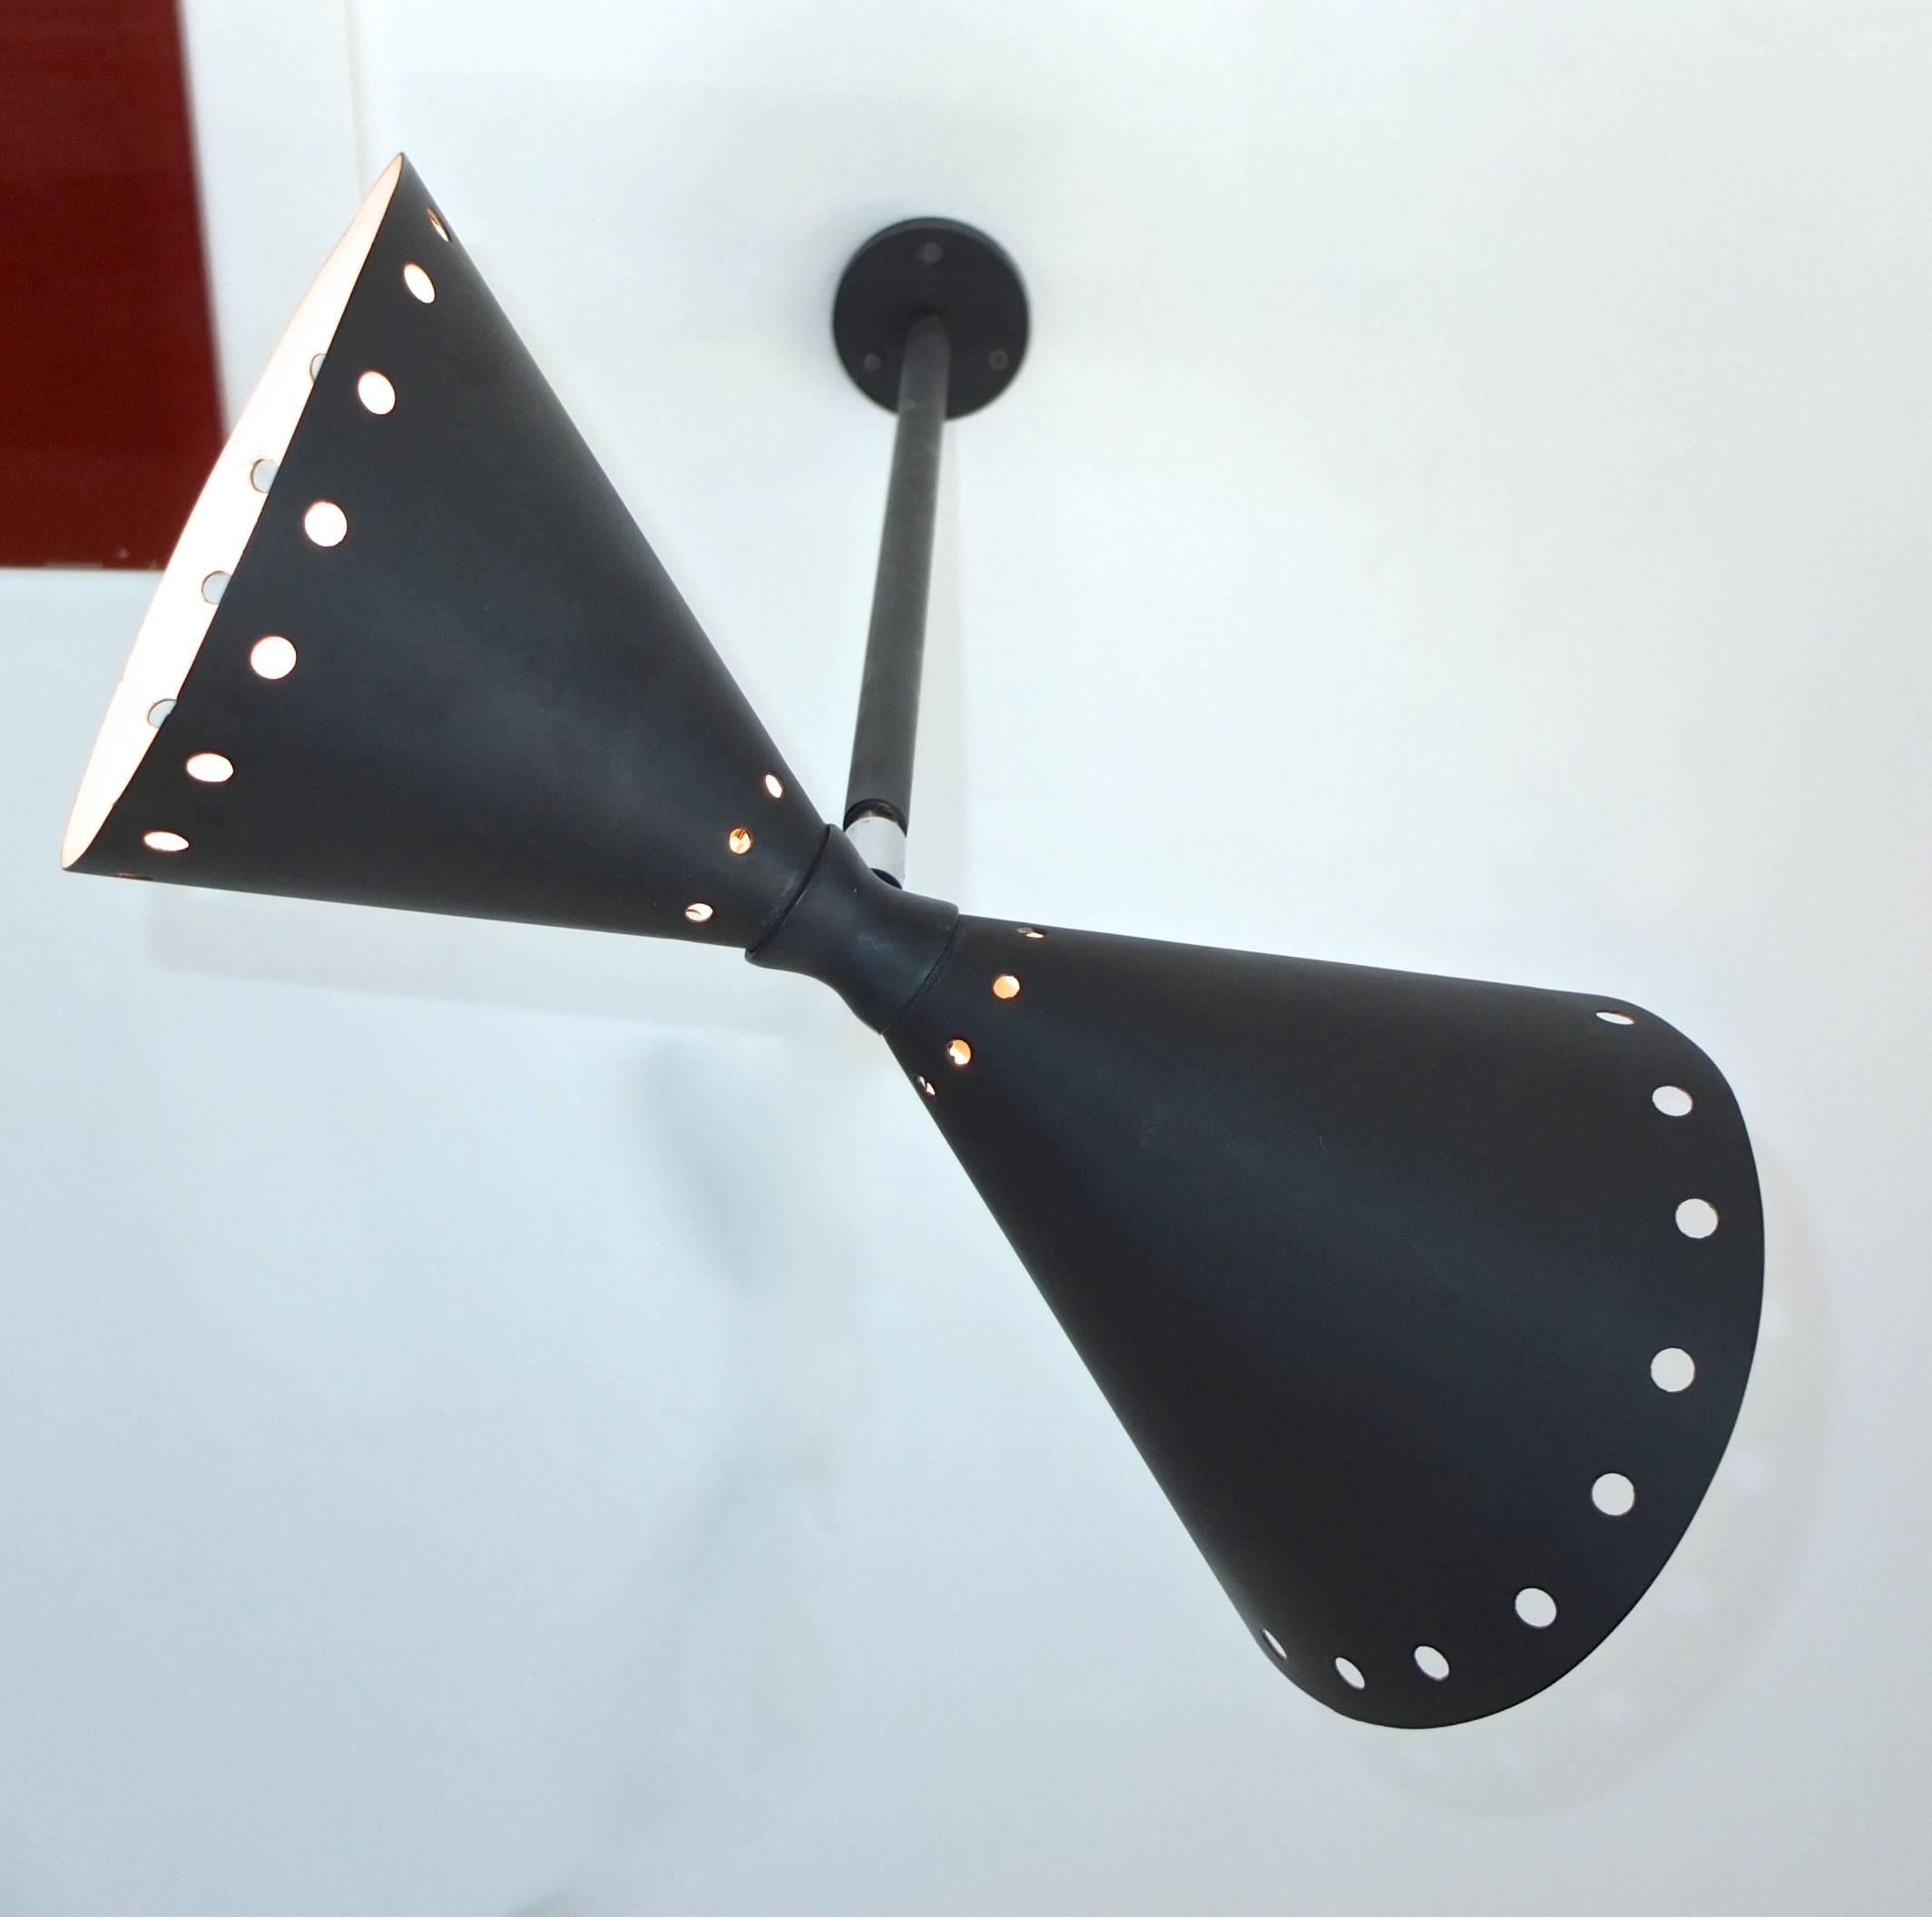 Stilnovo diabolo wall sconce in matte black enameled aluminum and chrome articulating joint. Asymmetrical double cones in perforated aluminum, connected by an hourglass collar fitting. Candelabra sized bulbs in both cones up to 60 watts each.